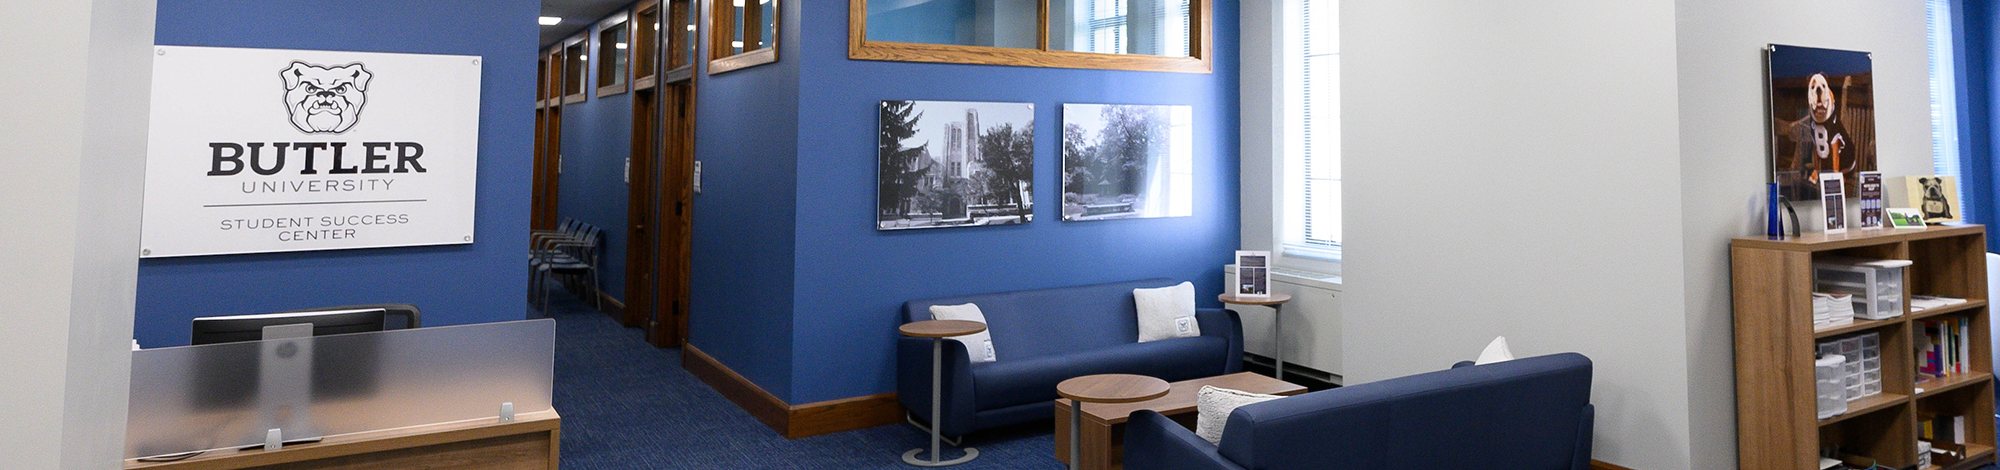 sign with Butler University Student Success Center, blue walls, blue chairs, photos on the walls